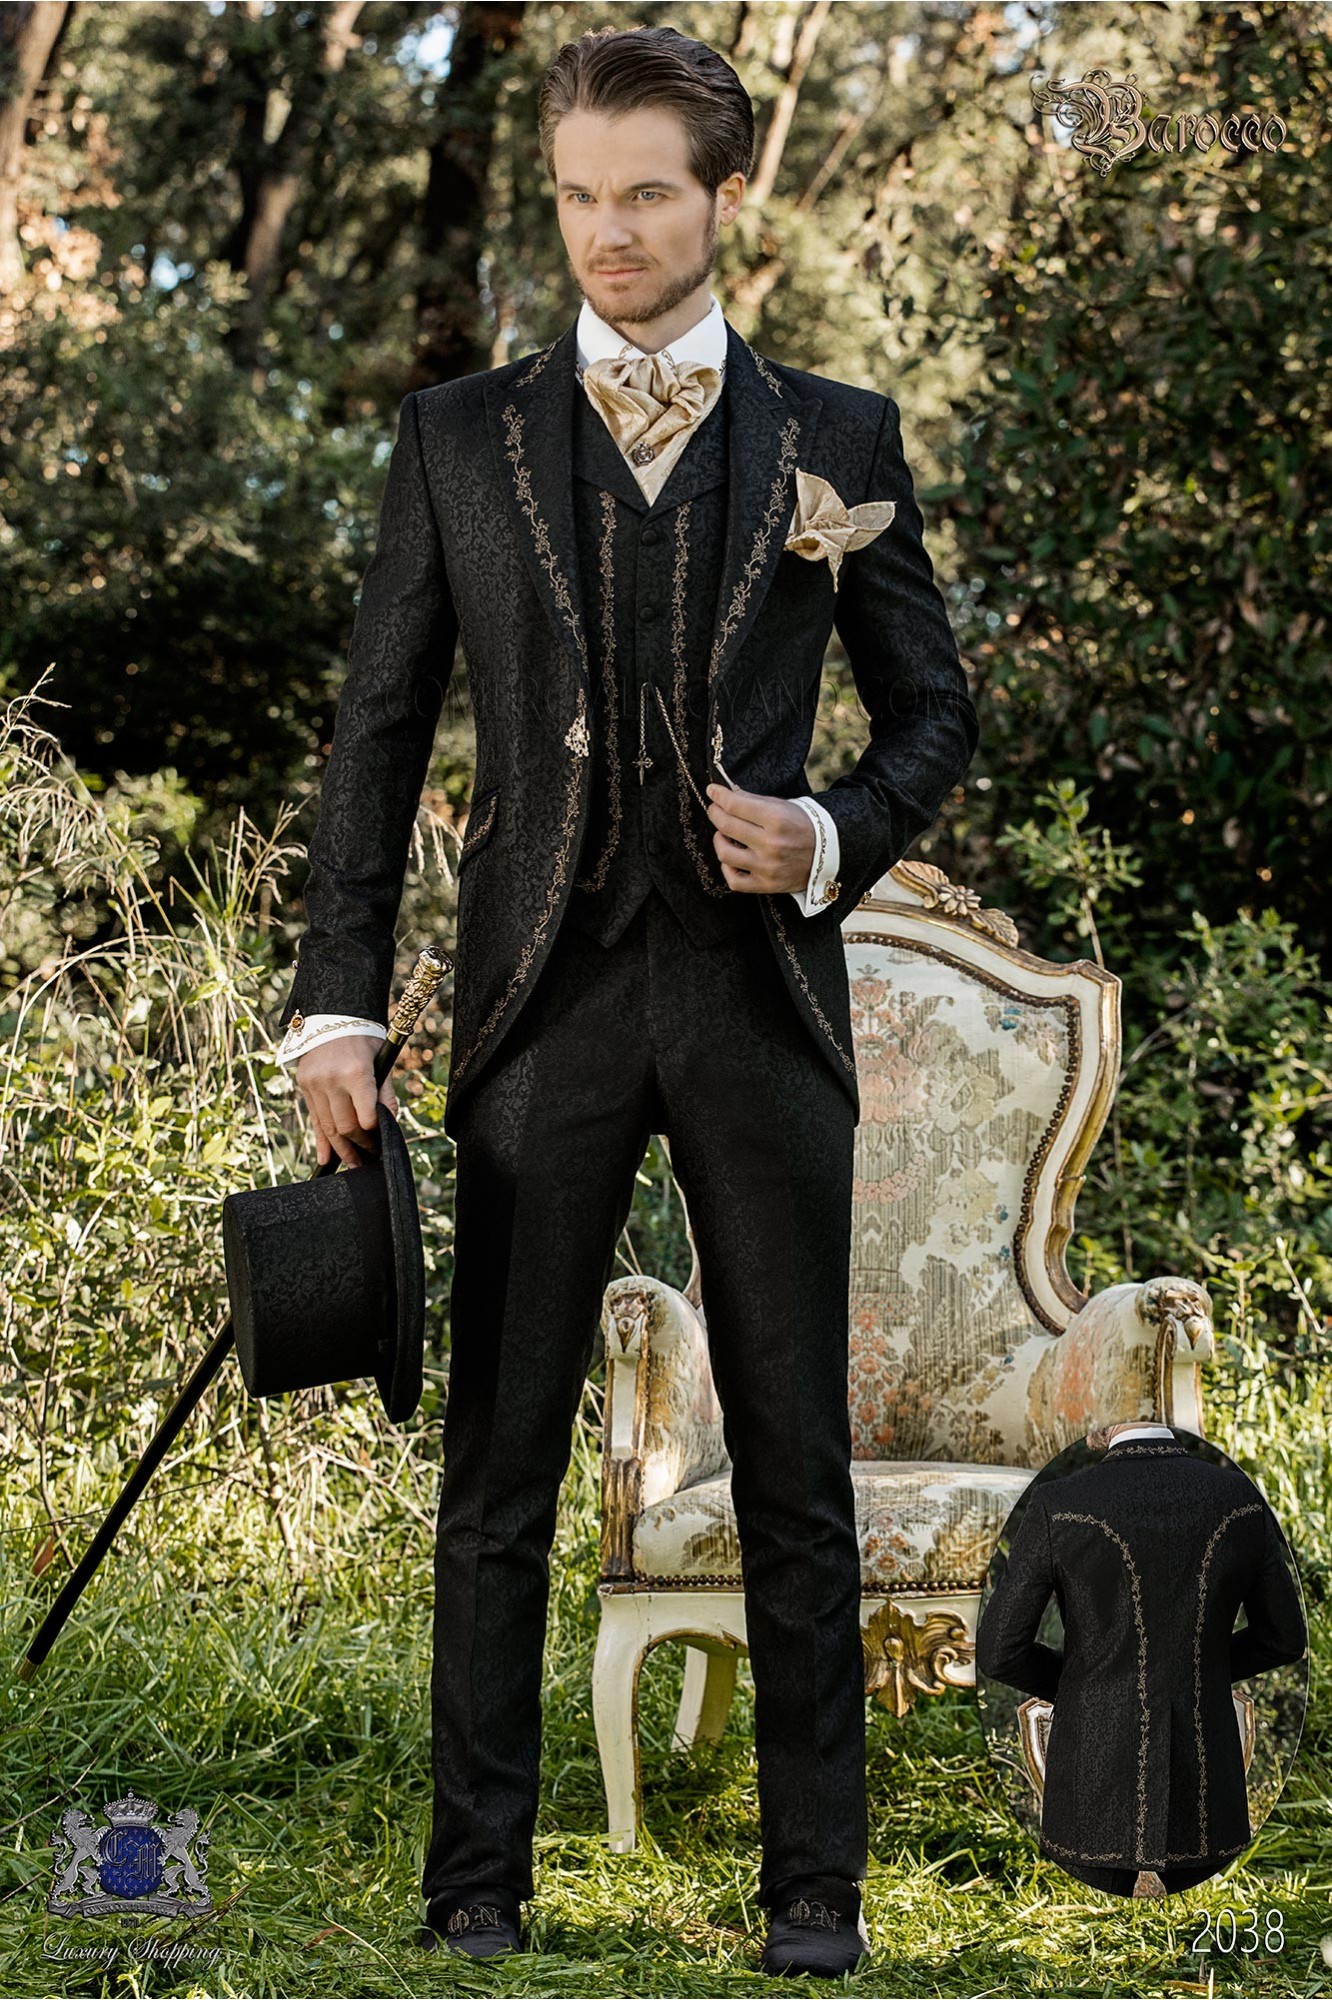 Baroque groom suit, vintage frock coat in black jacquard fabric with golden embroidery and crystal clasp